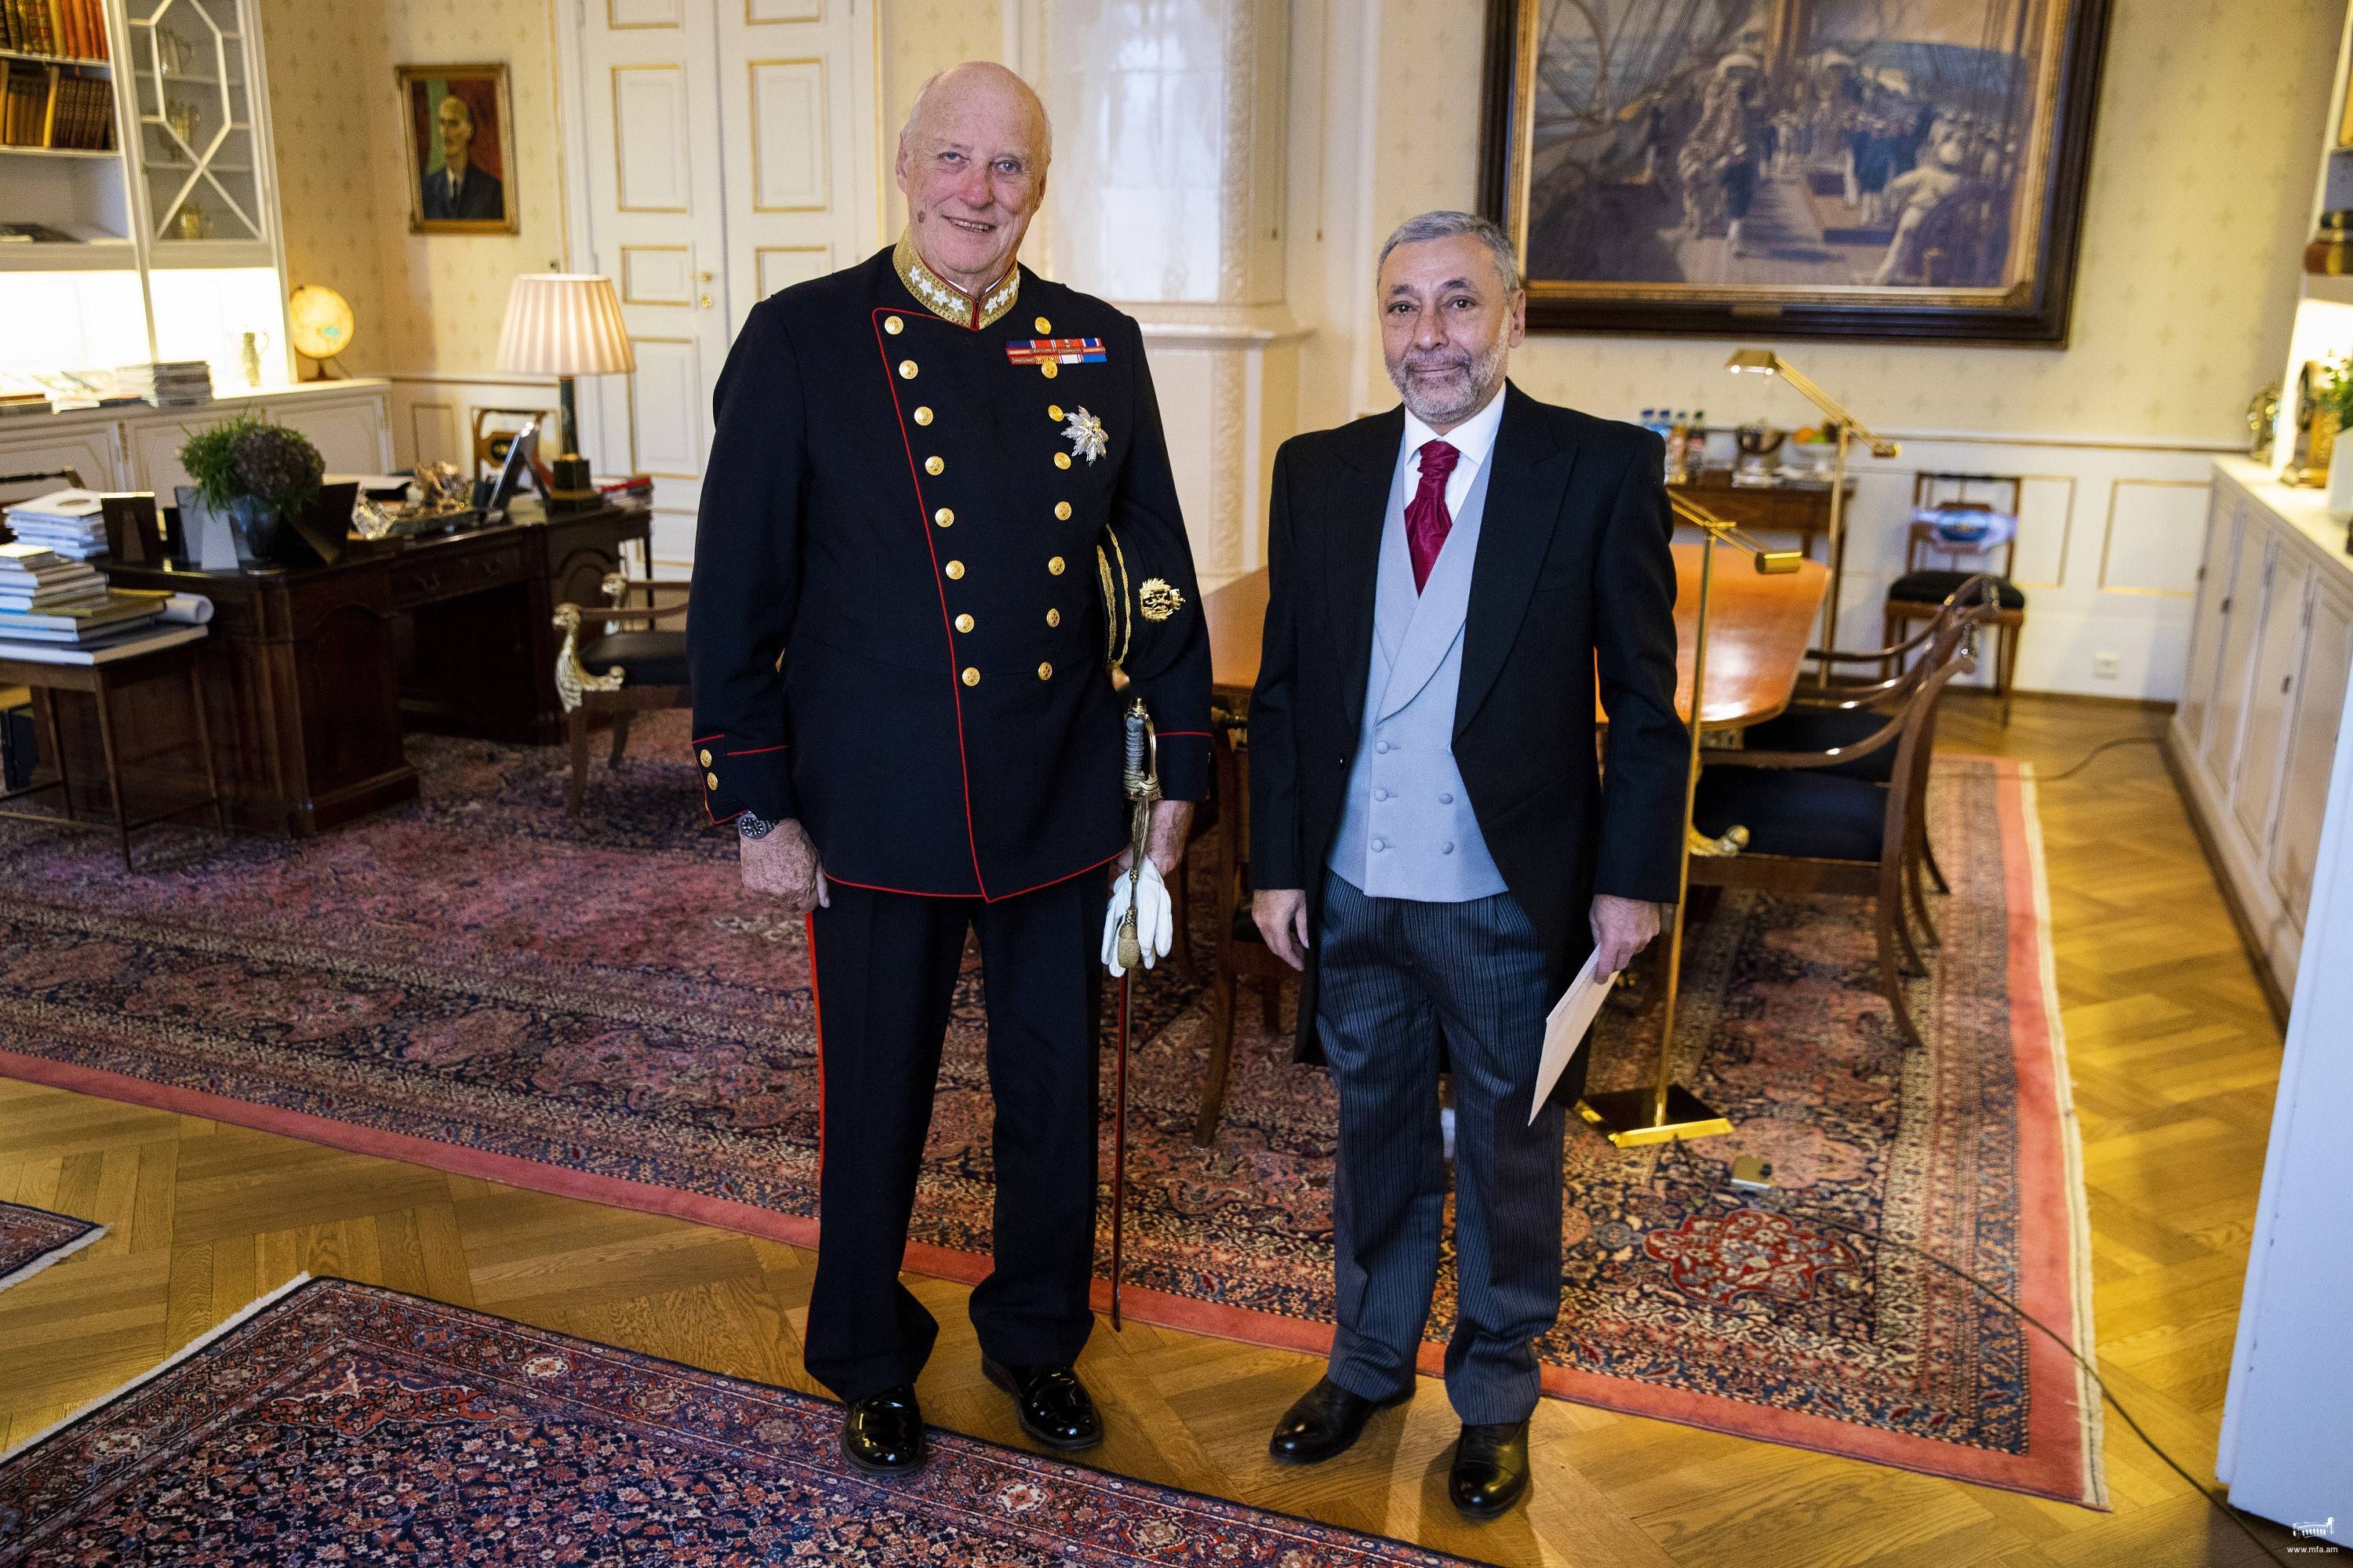 Ambassador Arzoumanian presented the Letters of Credence to the King of Norway 